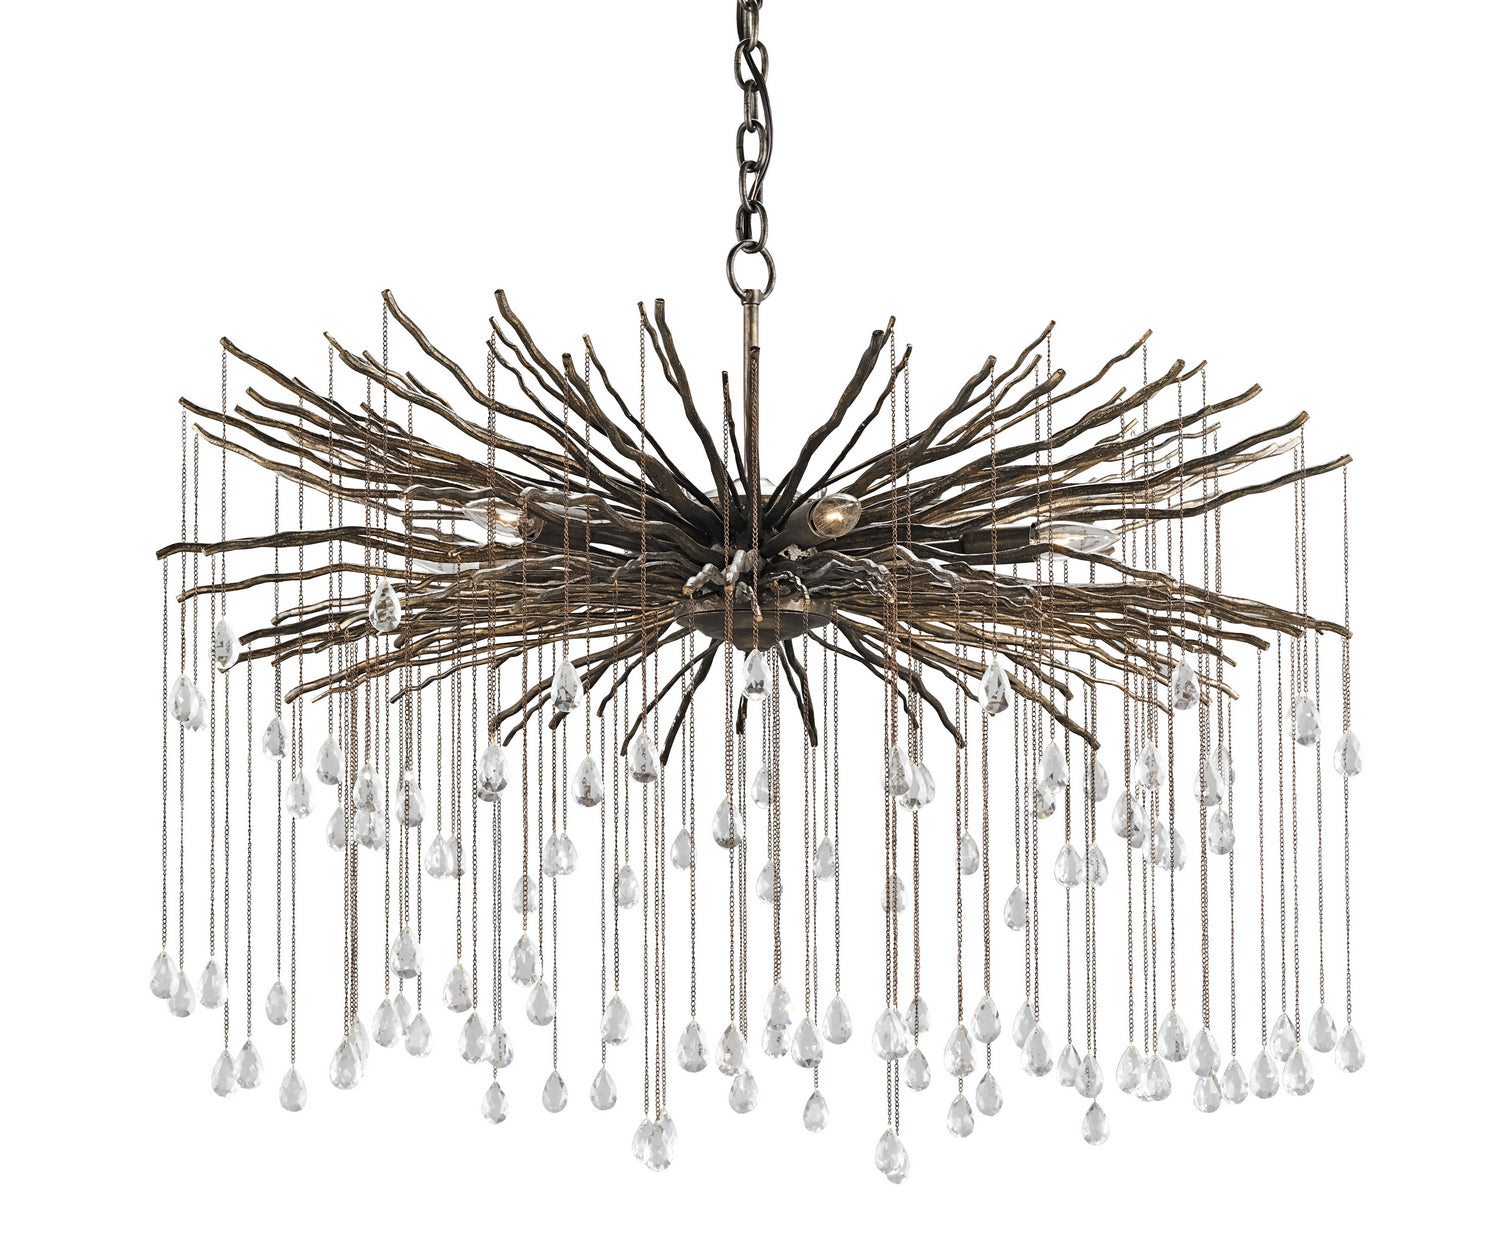 Six Light Chandelier from the Fen collection in Cupertino finish